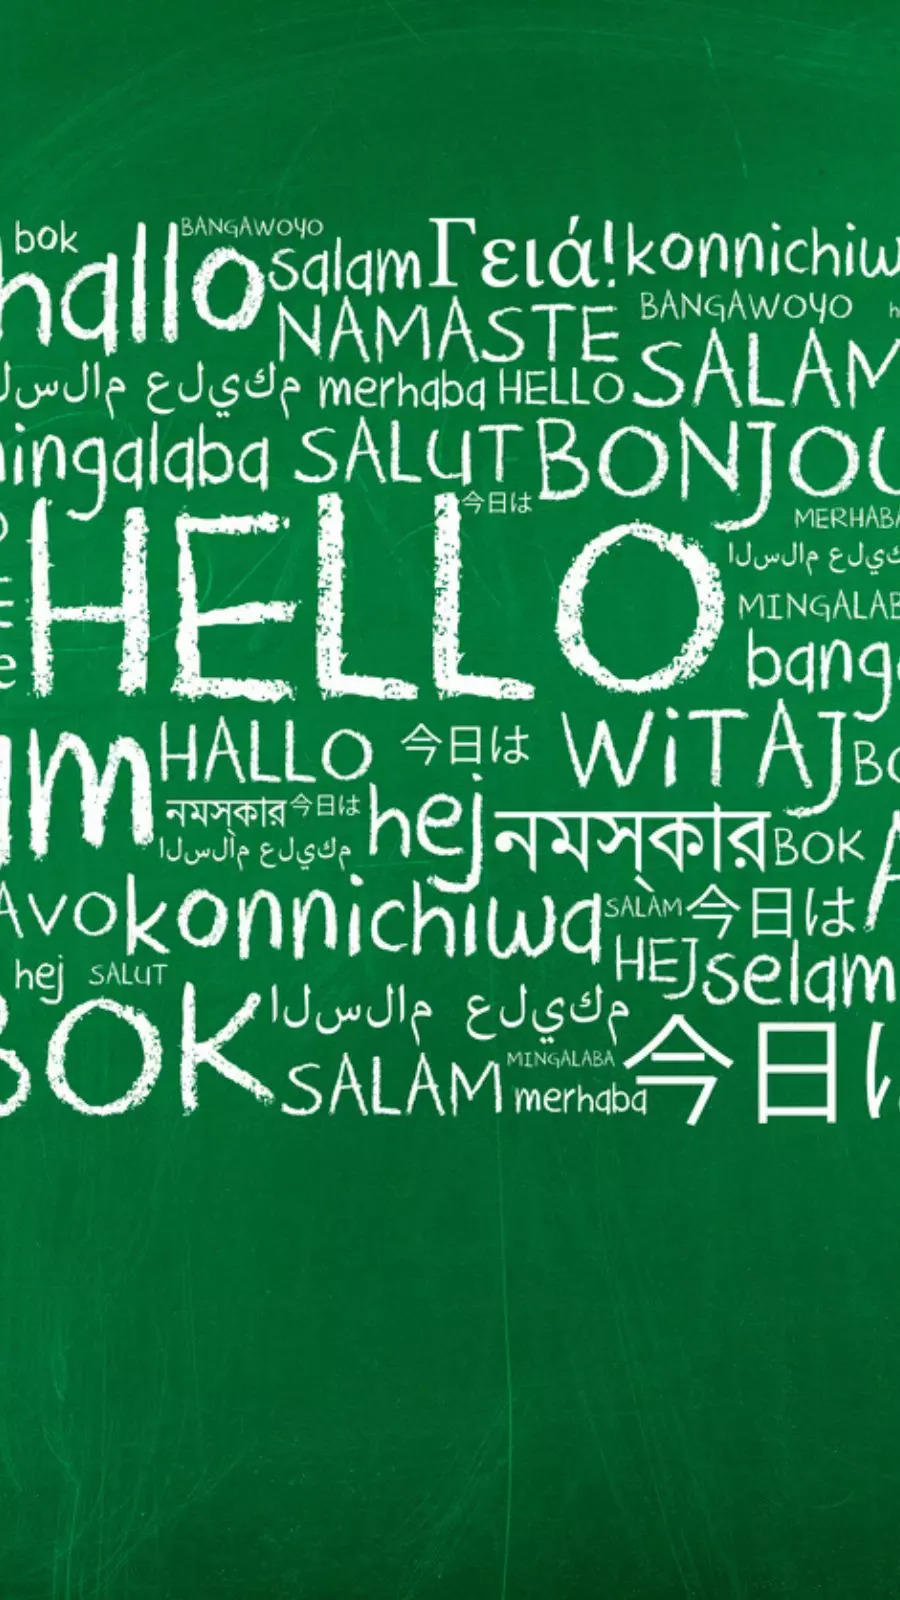 10 most spoken languages in the world: 2 from India in list 